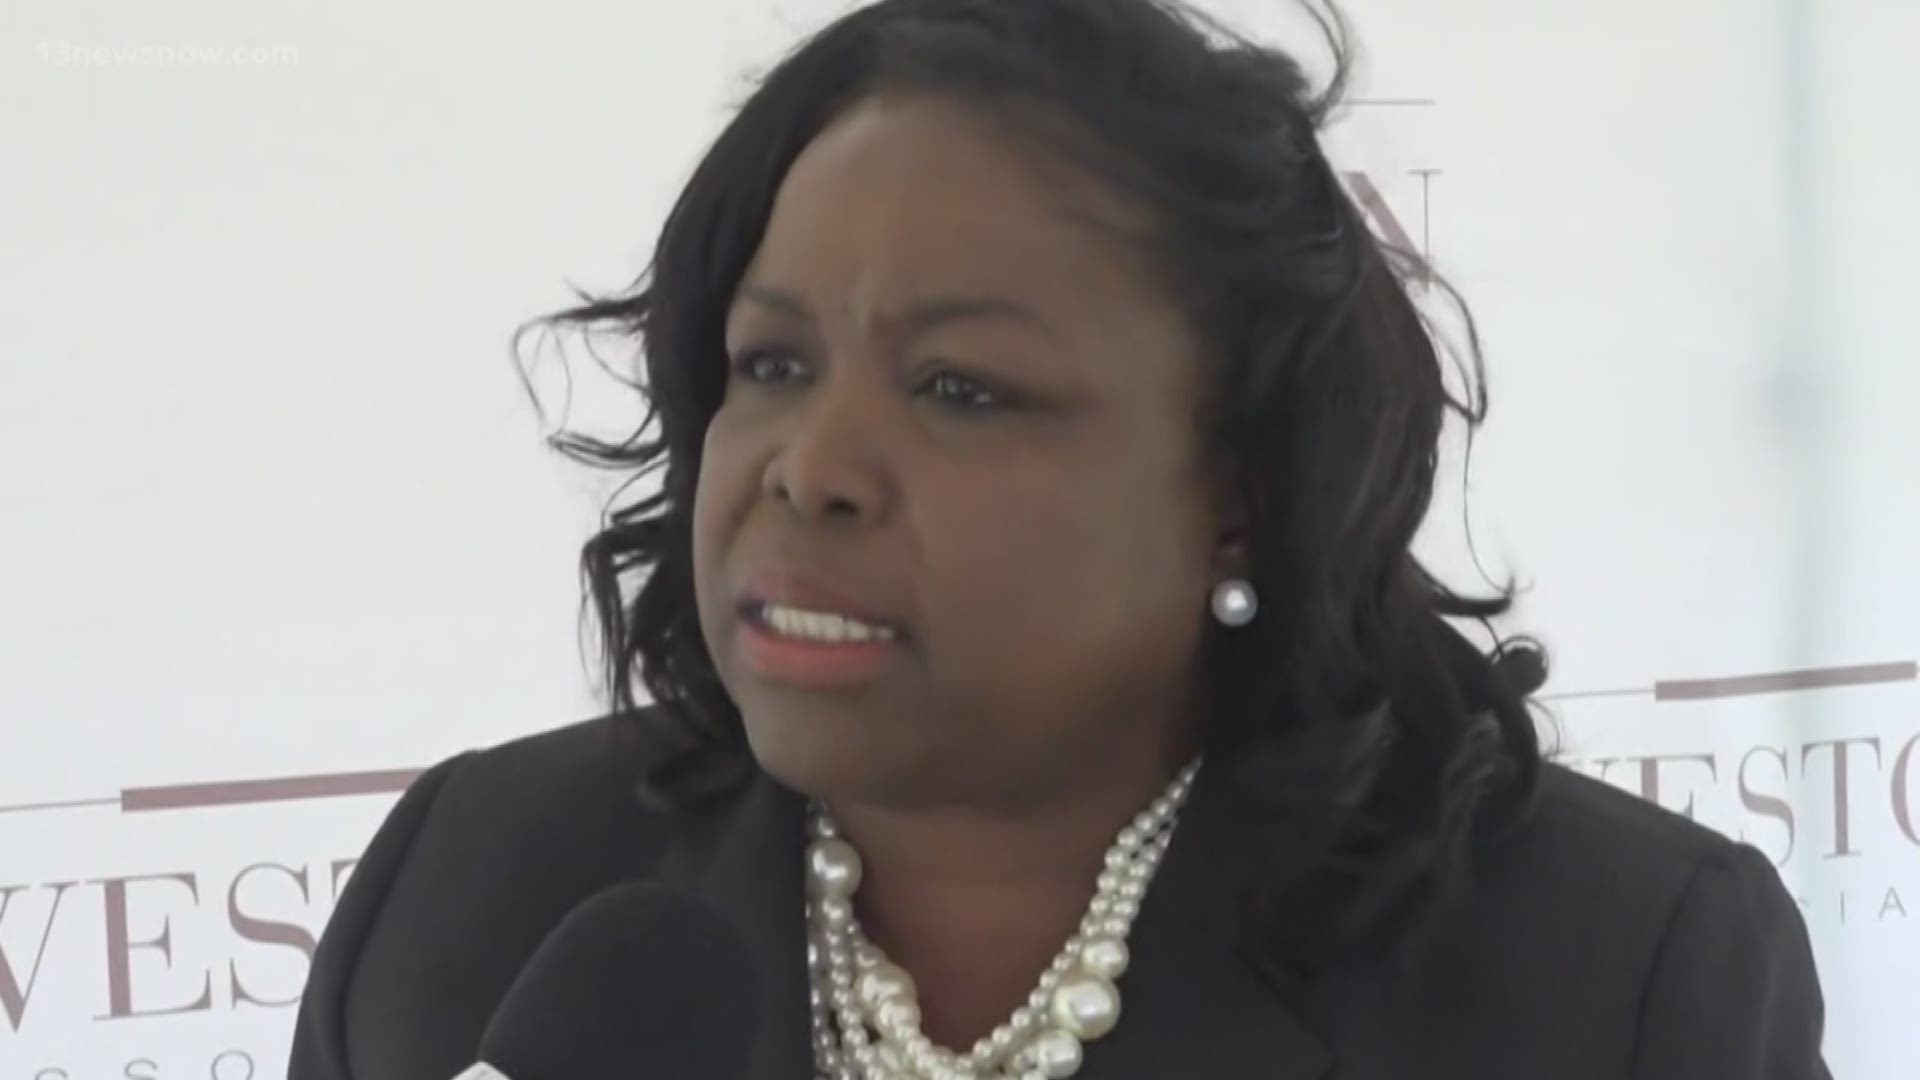 A group started a Change.org petition in hopes of removing Newport News Vice Mayor Tina Vick from office.